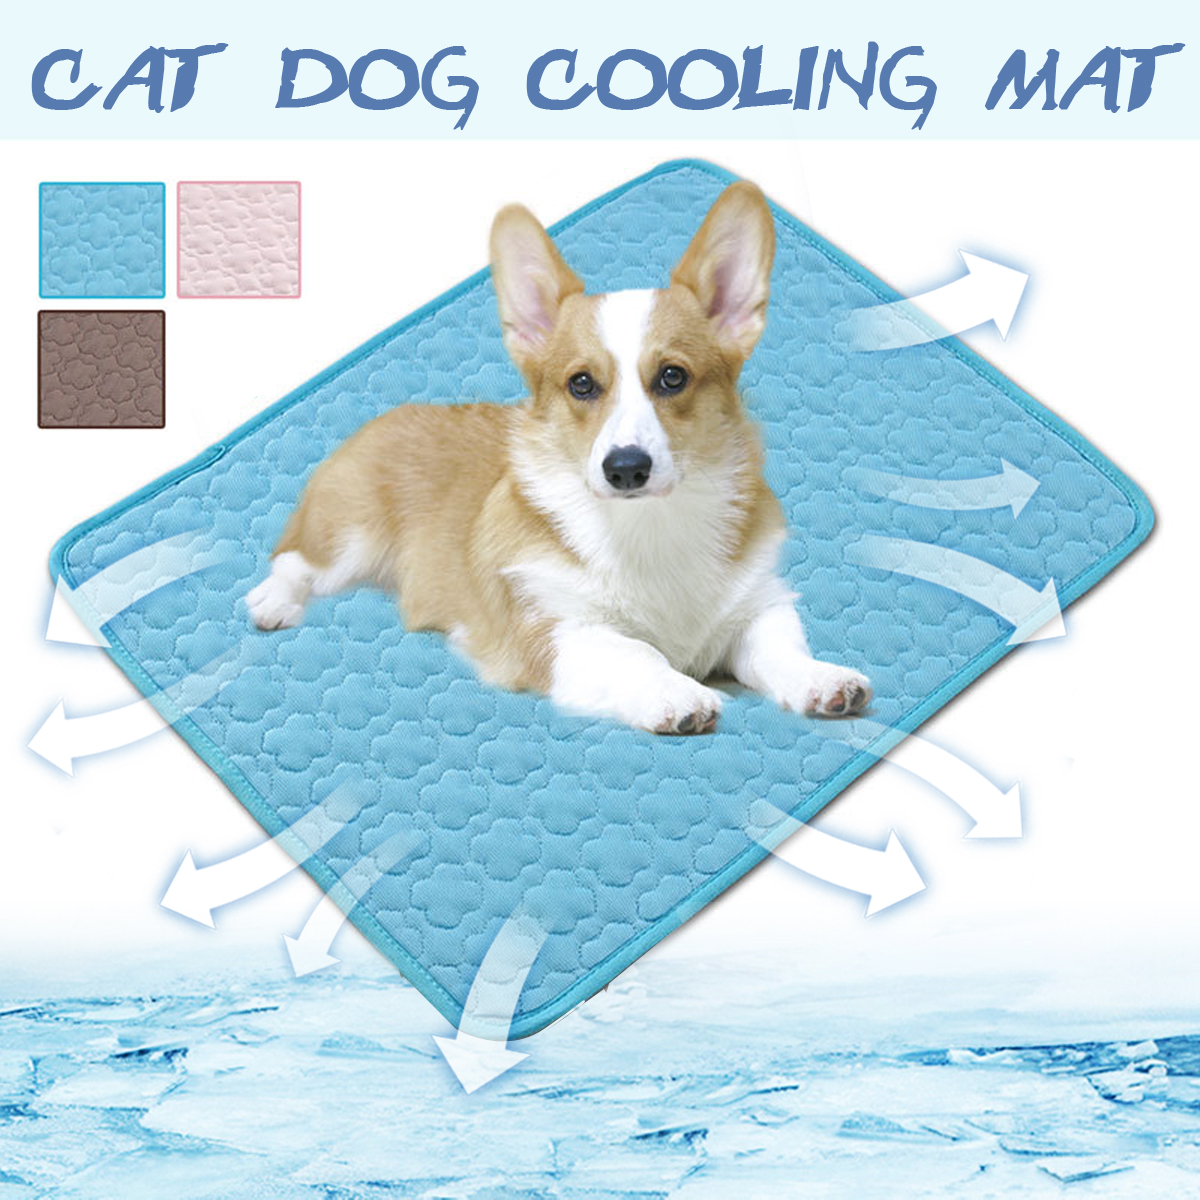 Pet-Cooling-Mat-Dog-Cat-Summer-Cooling-Cushion-Pads-Breathable-Comfortable-Dog-Supplies-1889099-1